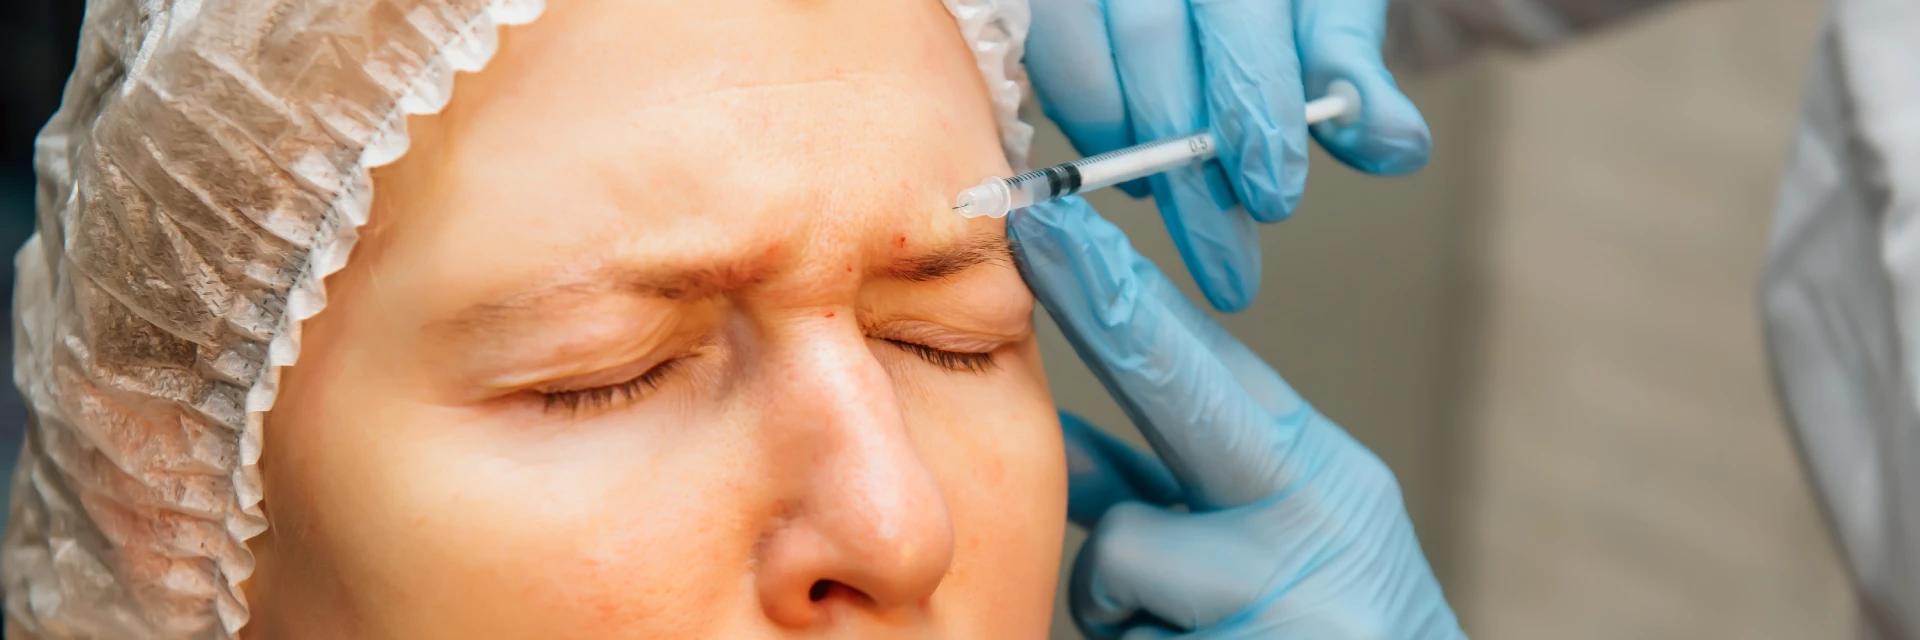 Portrait of a mature woman undergoing a Botox injection